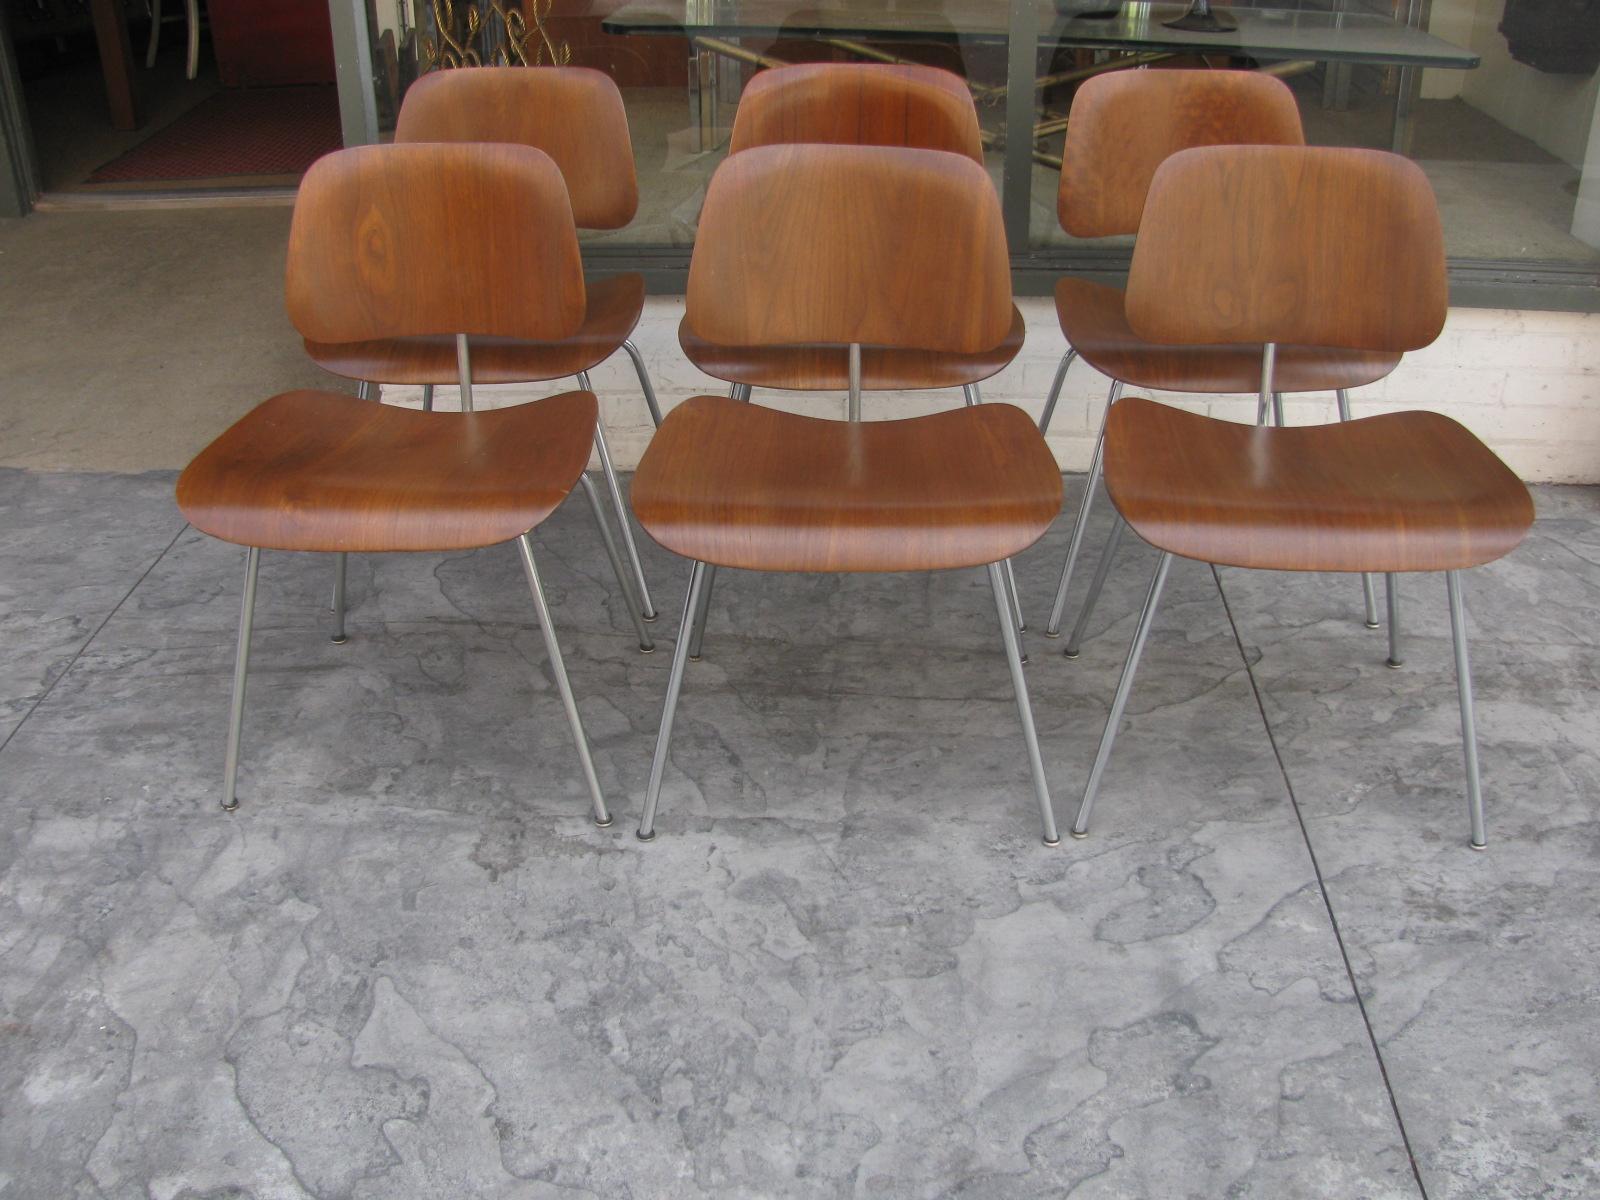 Wonderful set of six DCM dining chairs by Charles and Ray Eames. This is an early set as they are all labeled Evans molded plywood along with The Herman Miller Furniture Co. believed to be 1946 edition. Chairs are all in very good vintage condition